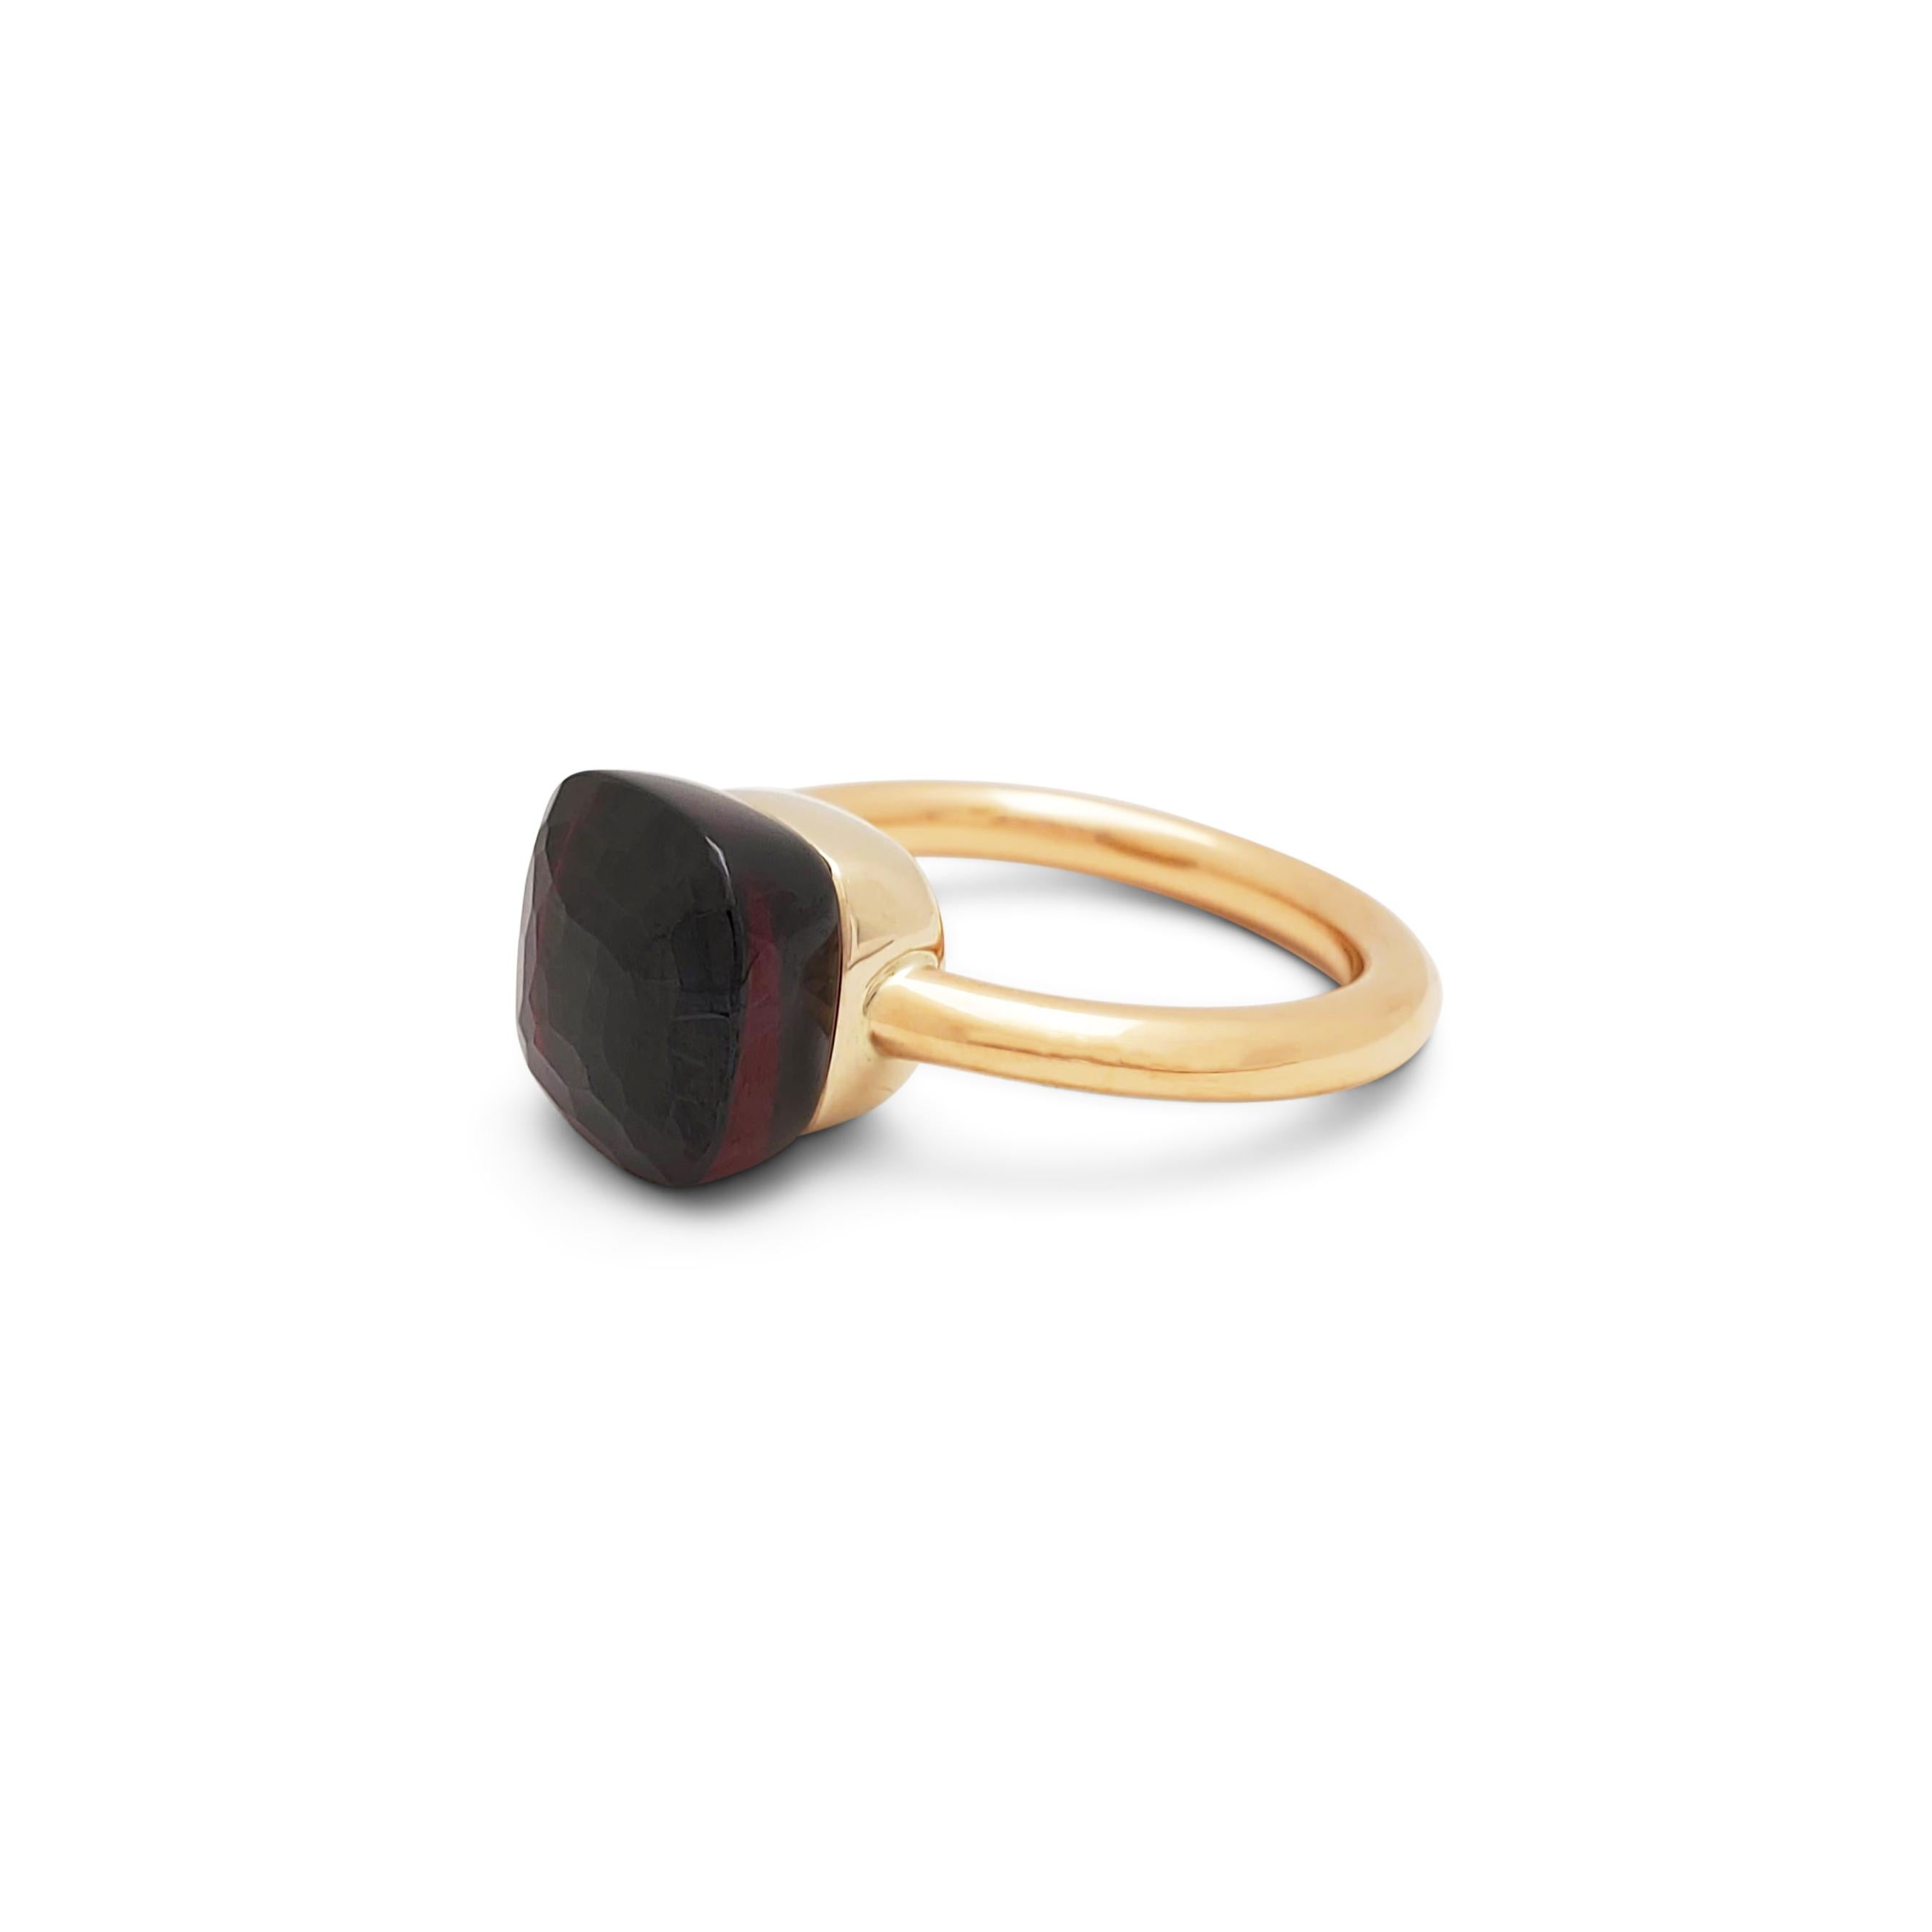 Authentic Pomellato Nudo Classic ring crafted in 18 karat rose and white gold and featuring a faceted garnet stone measuring 10.4mm x 10.4mm. Signed Pomellato. Ring size 6 1/4. Ring is presented with the original box and authenticity card.  CIRCA